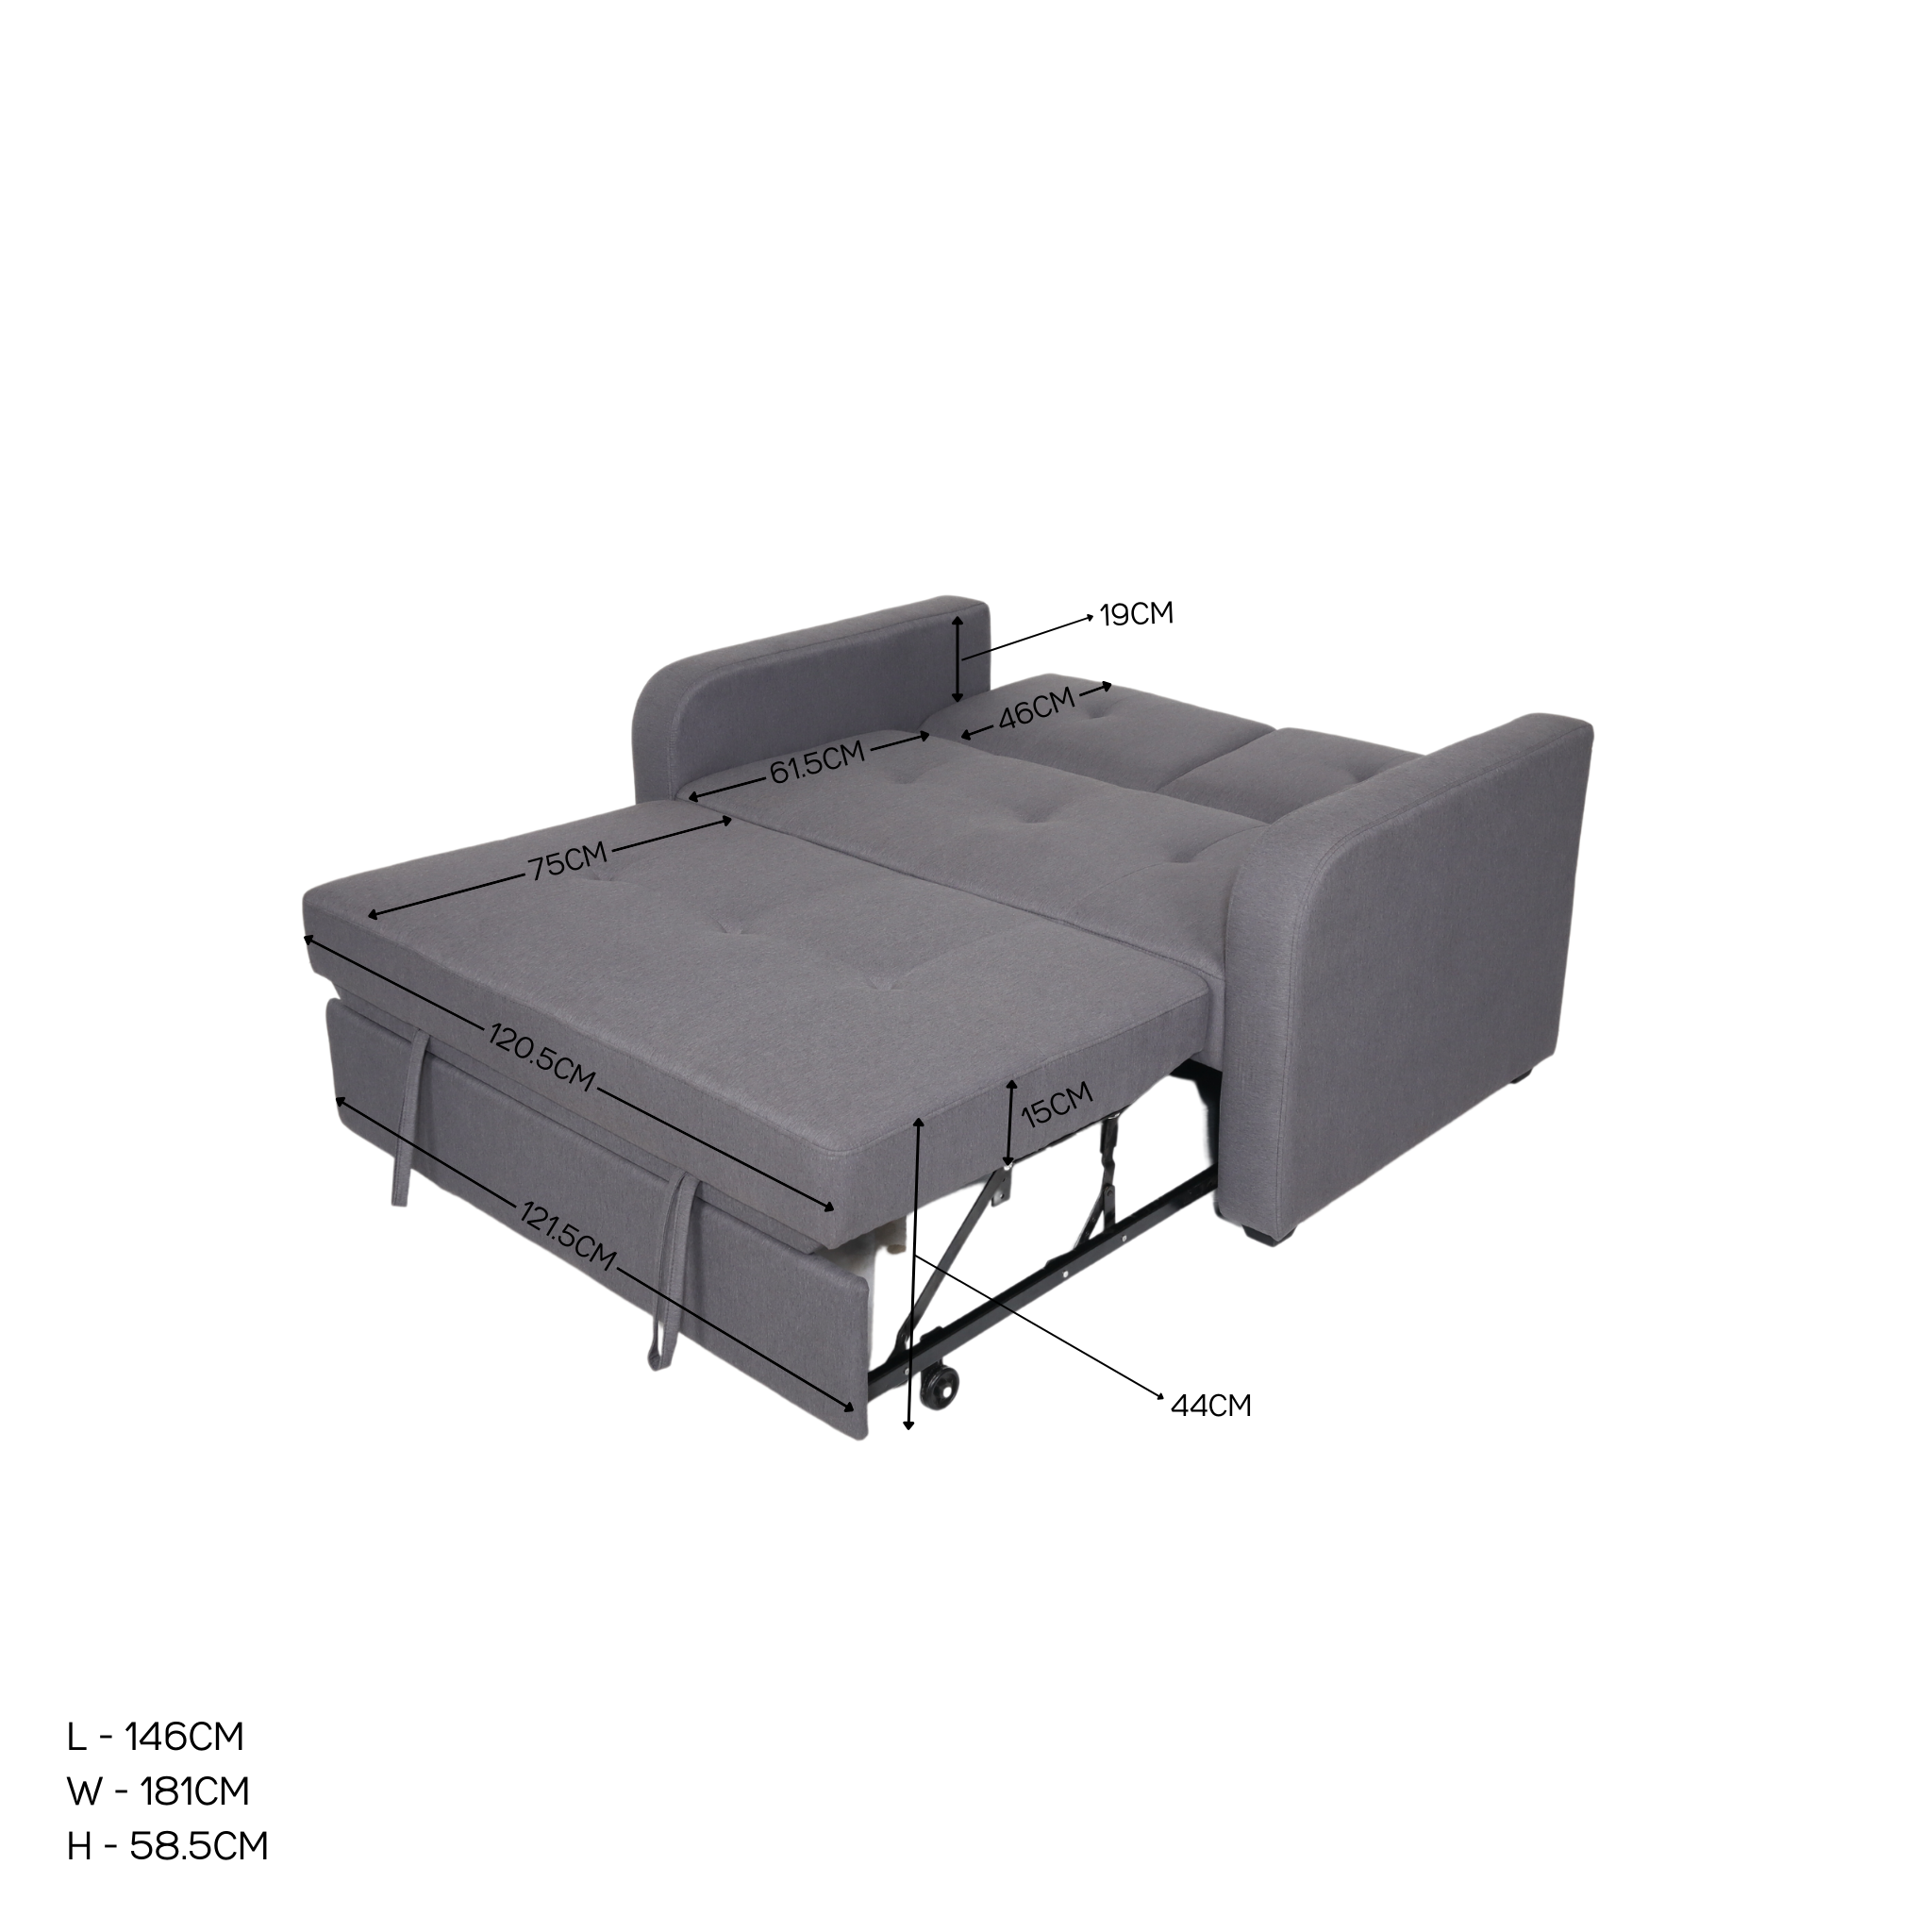 SKY Pullout Fabric Sofa Bed AF Home